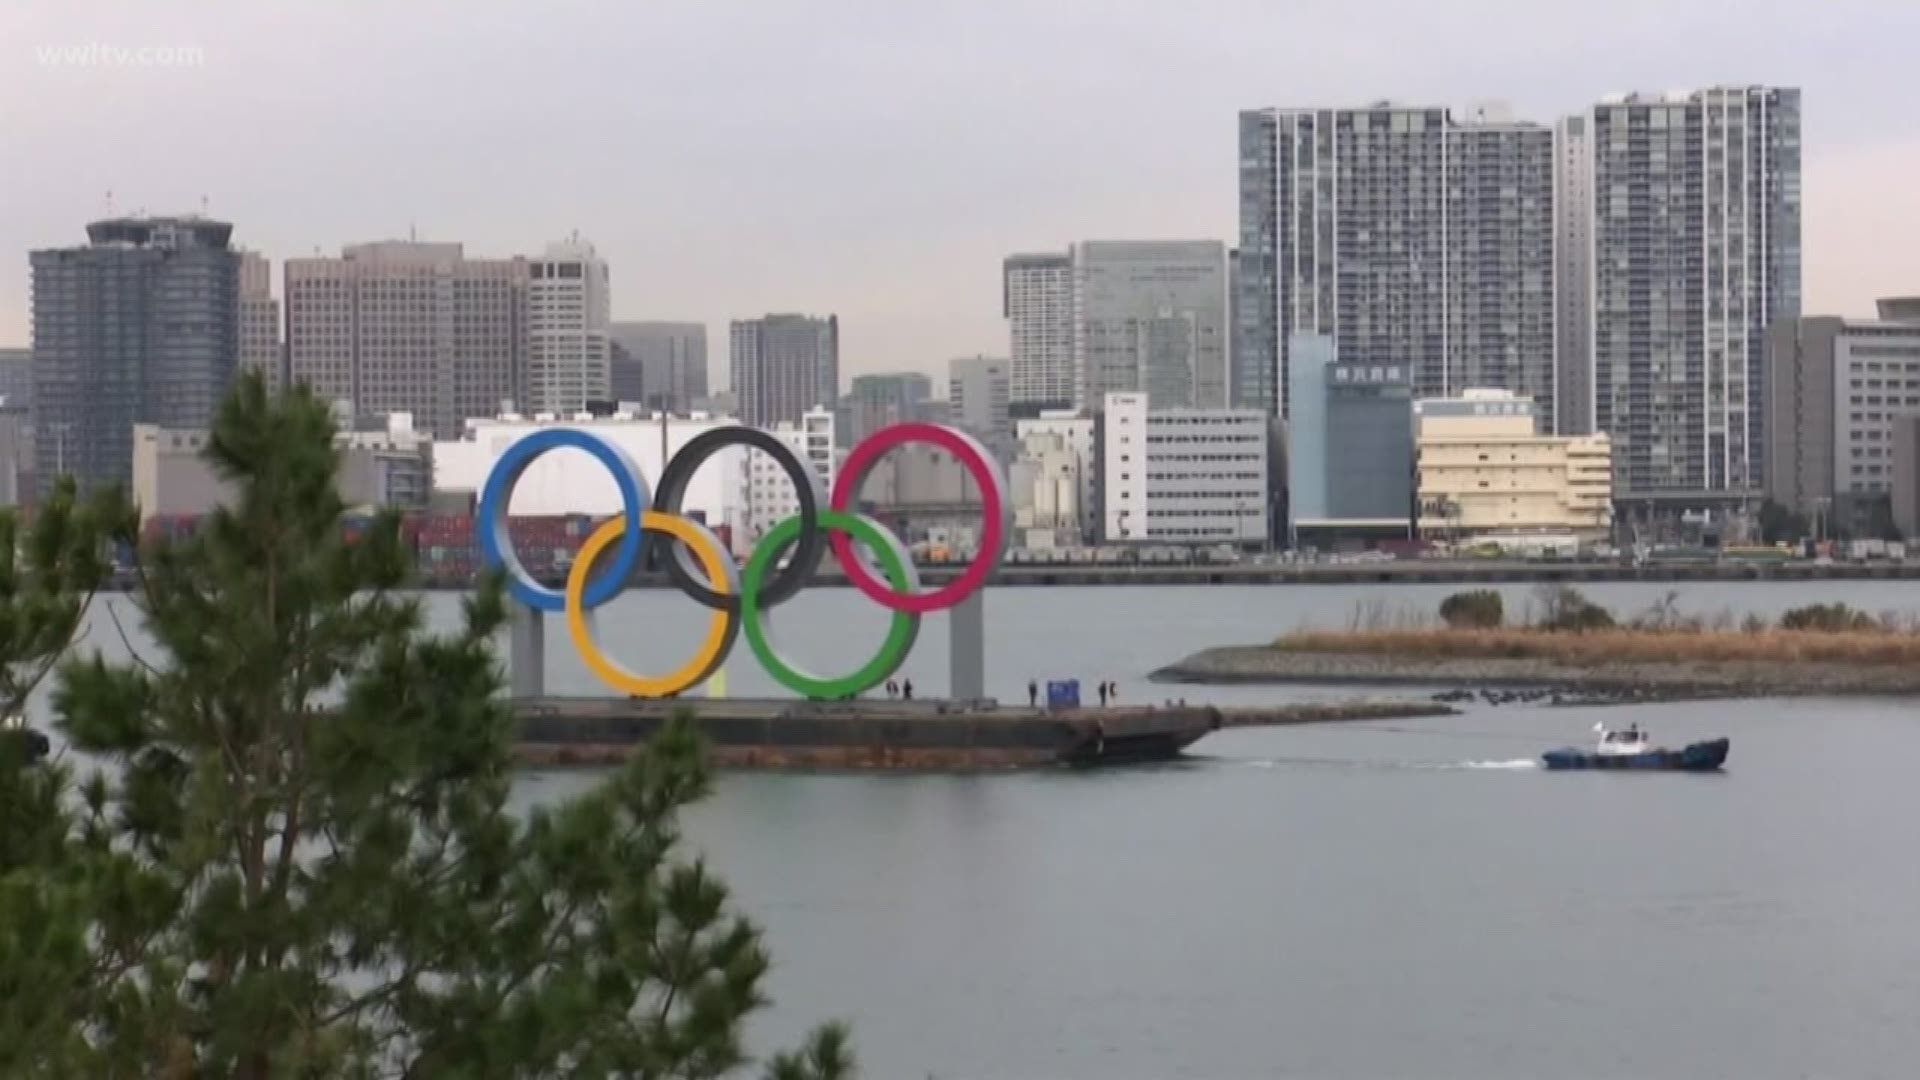 The International Olympic Committee officially postponed the games Tuesday. Multiple countries had said they wouldn't send athletes if the games went on as planned.